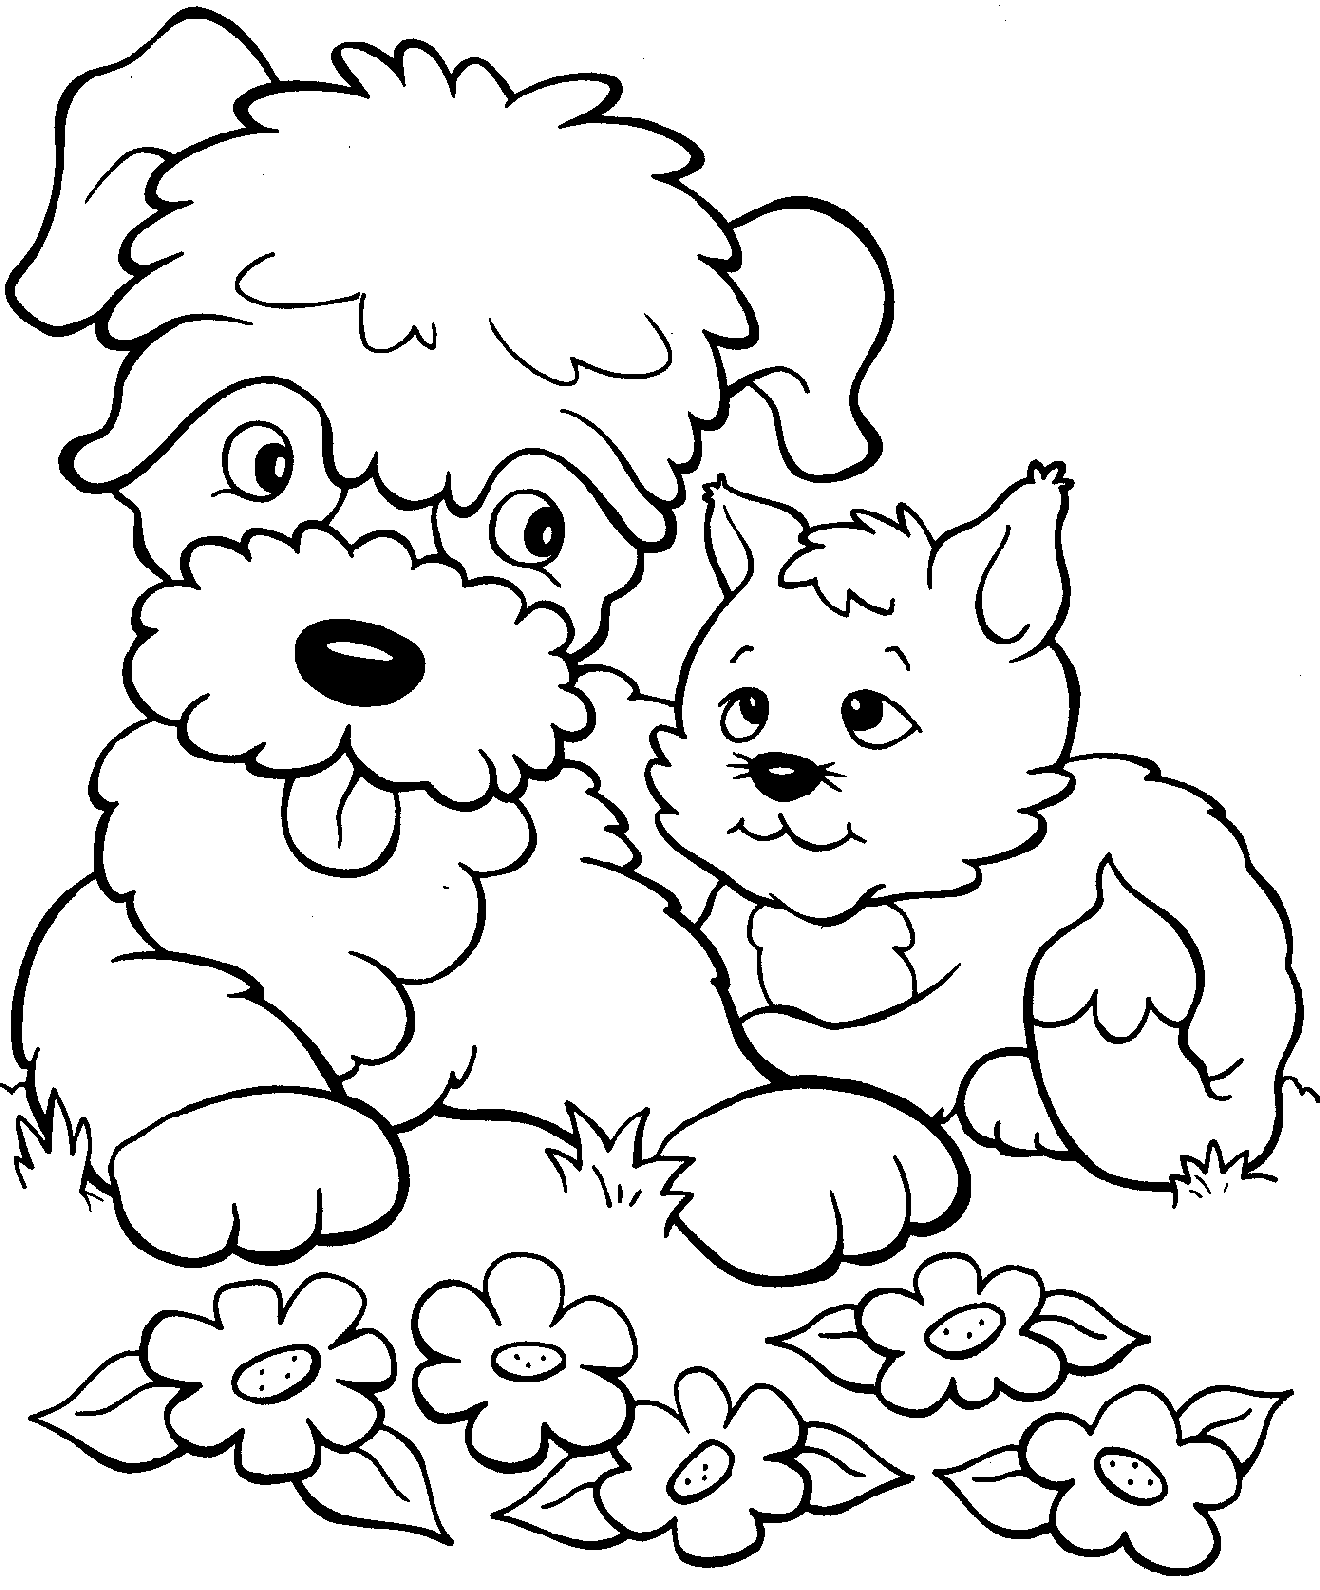 kitten-coloring-pages-best-coloring-pages-for-kids